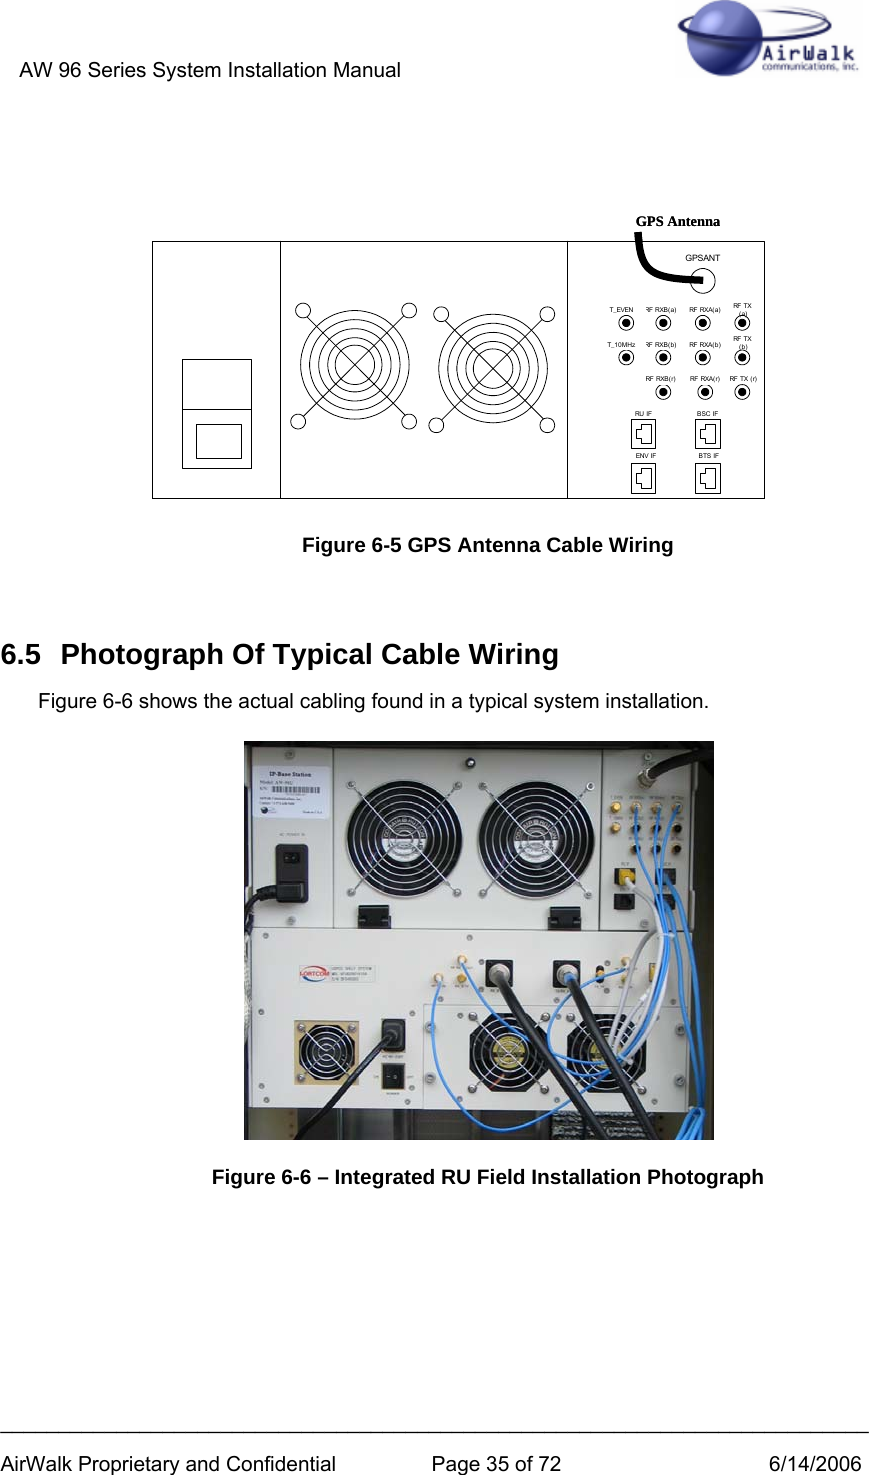 AW 96 Series System Installation Manual          ___________________________________________________________________________ AirWalk Proprietary and Confidential  Page 35 of 72  6/14/2006          Figure 6-5 GPS Antenna Cable Wiring  6.5  Photograph Of Typical Cable Wiring Figure 6-6 shows the actual cabling found in a typical system installation.           Figure 6-6 – Integrated RU Field Installation Photograph     GPSANTRF  RXB( a) RF RXA(a) RF  TX (a)RF  RXB( b) RF  RXA(b ) RF  TX (b)RF  RXB (r ) RF  RXA(r) RF  TX (r)T_EVENT_10MHzRU  IF BSC IFENV  IF  BTS IFGPS AntennaGPSANTRF  RXB( a) RF RXA(a) RF  TX (a)RF  RXB( b) RF  RXA(b ) RF  TX (b)RF  RXB (r ) RF  RXA(r) RF  TX (r)T_EVENT_10MHzRU  IF BSC IFENV  IF  BTS IFGPS Antenna